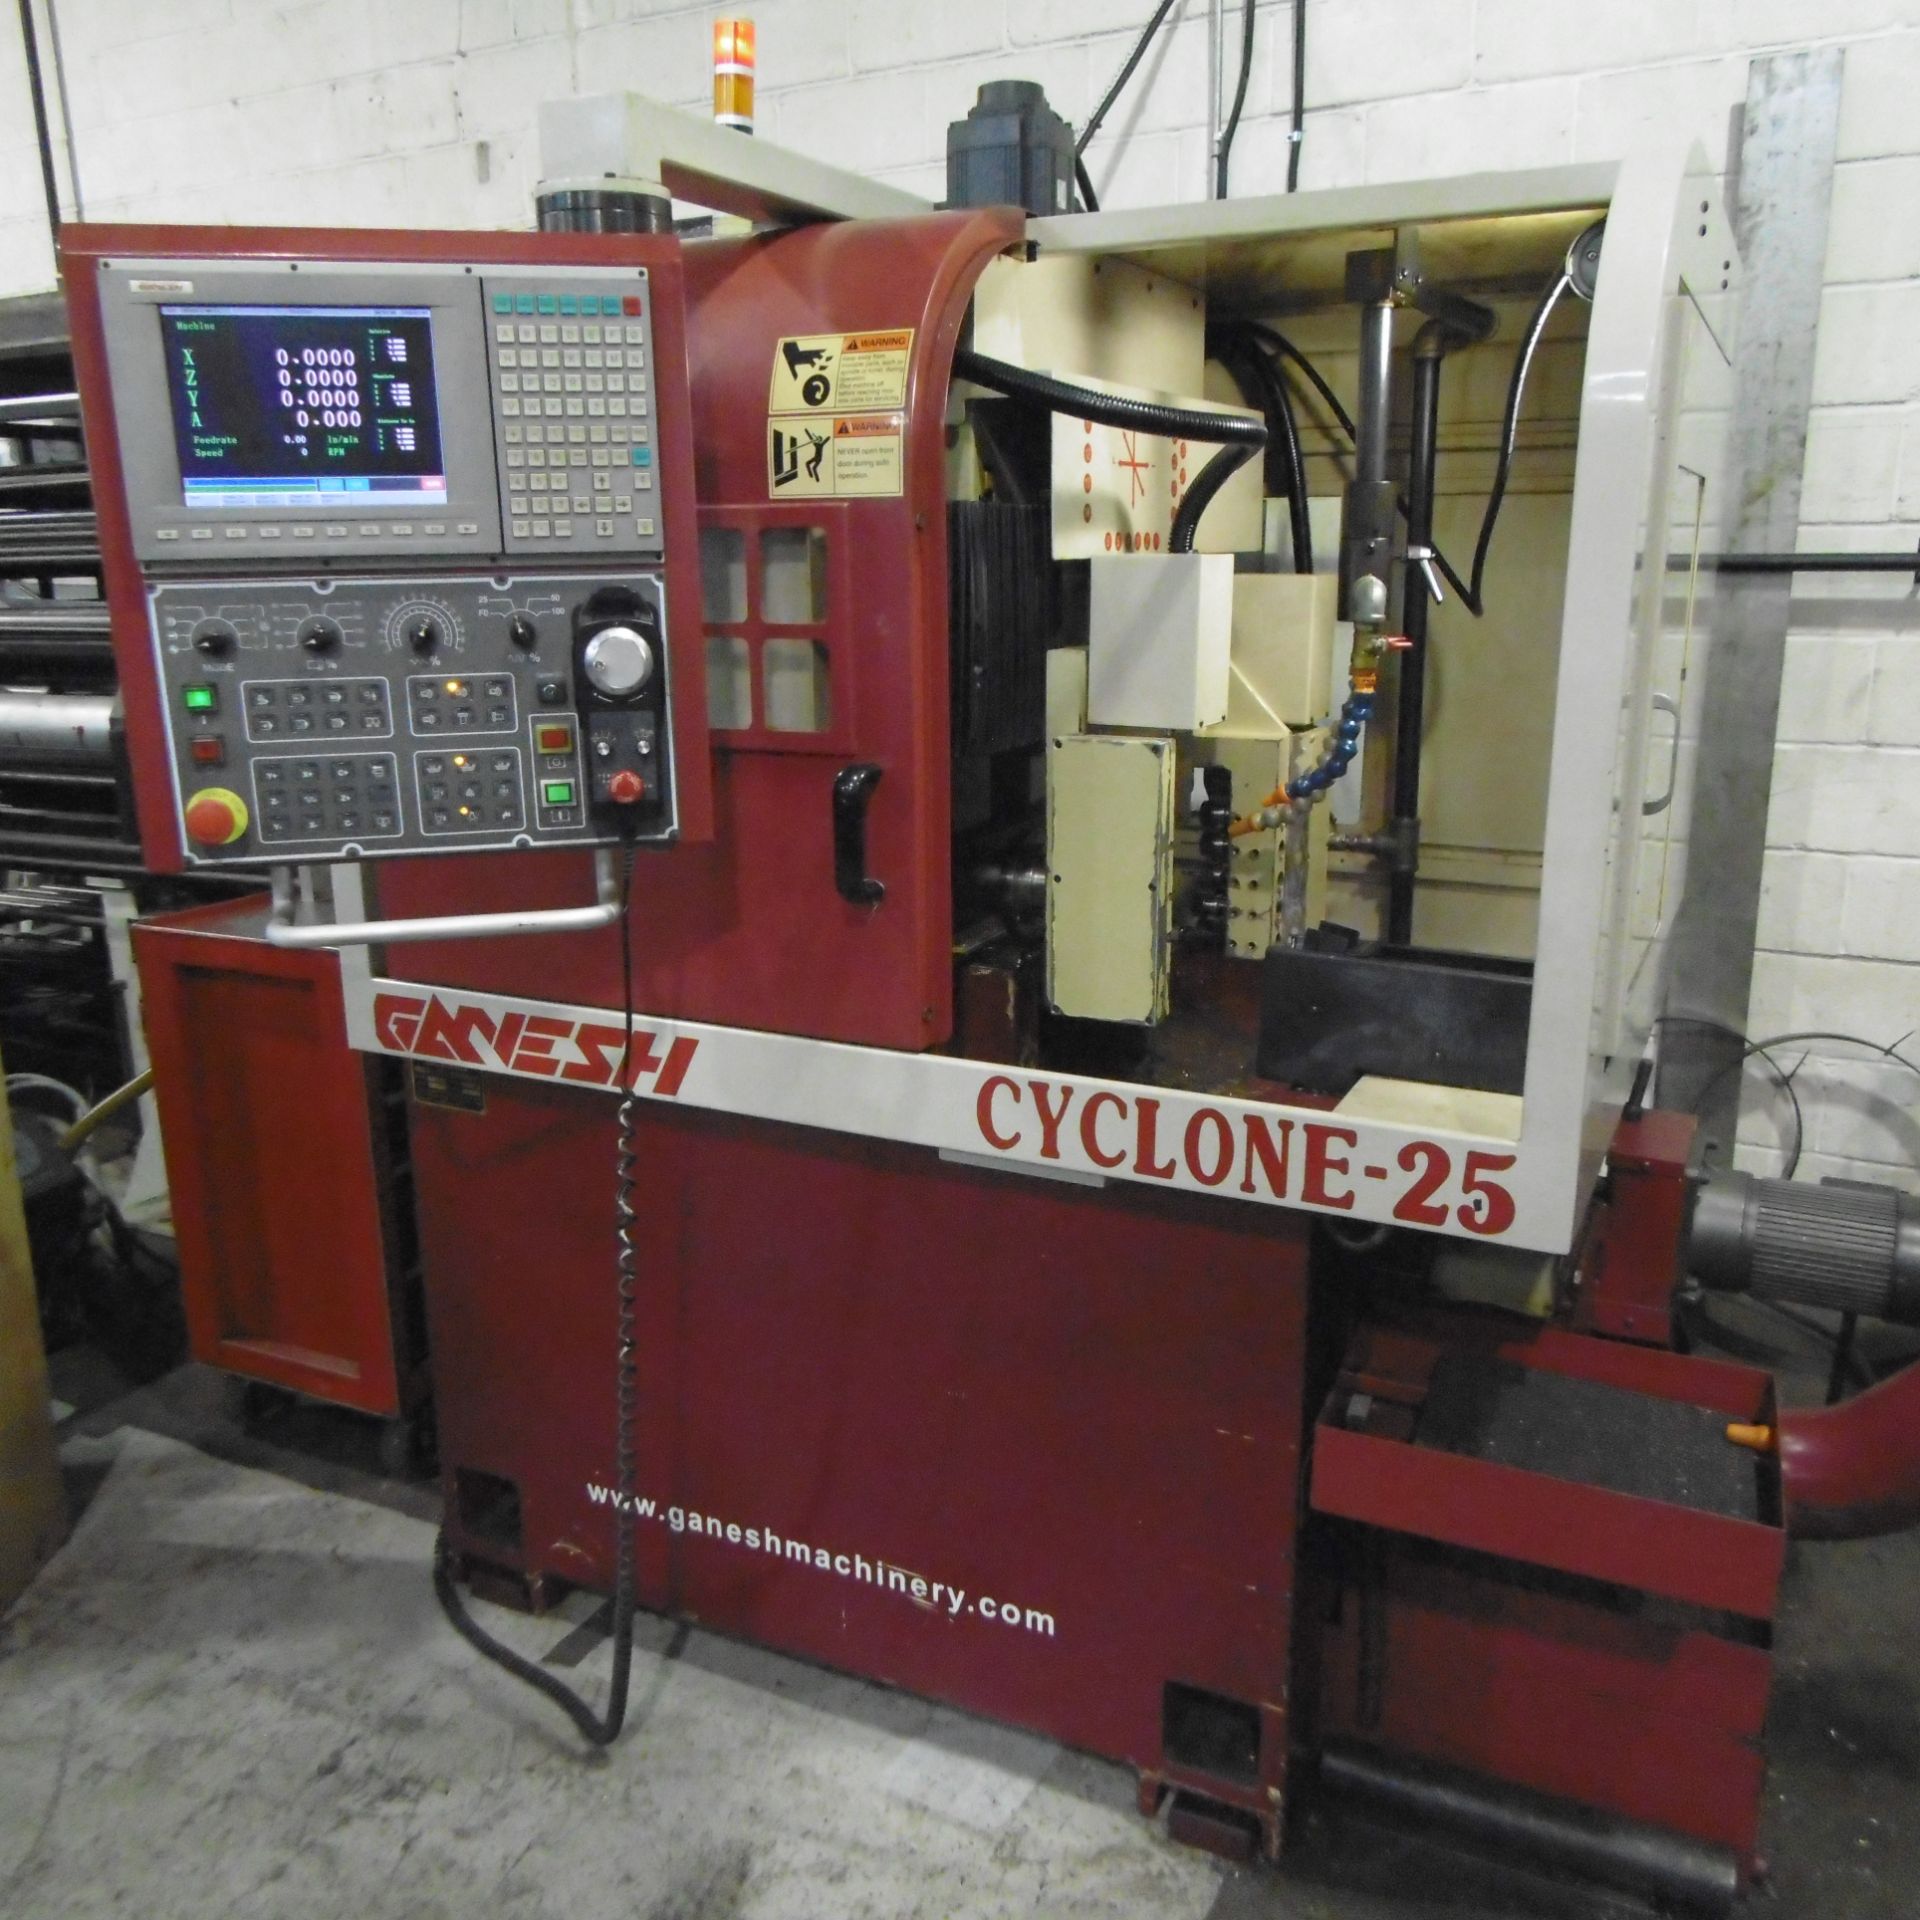 GANESH CYCLONE 25 SWISS TYPE CNC TURNING CENTER WITH SYNTECH 900 CNC CONTROL, TRAVELS X-7.5", Z-6. - Image 2 of 4